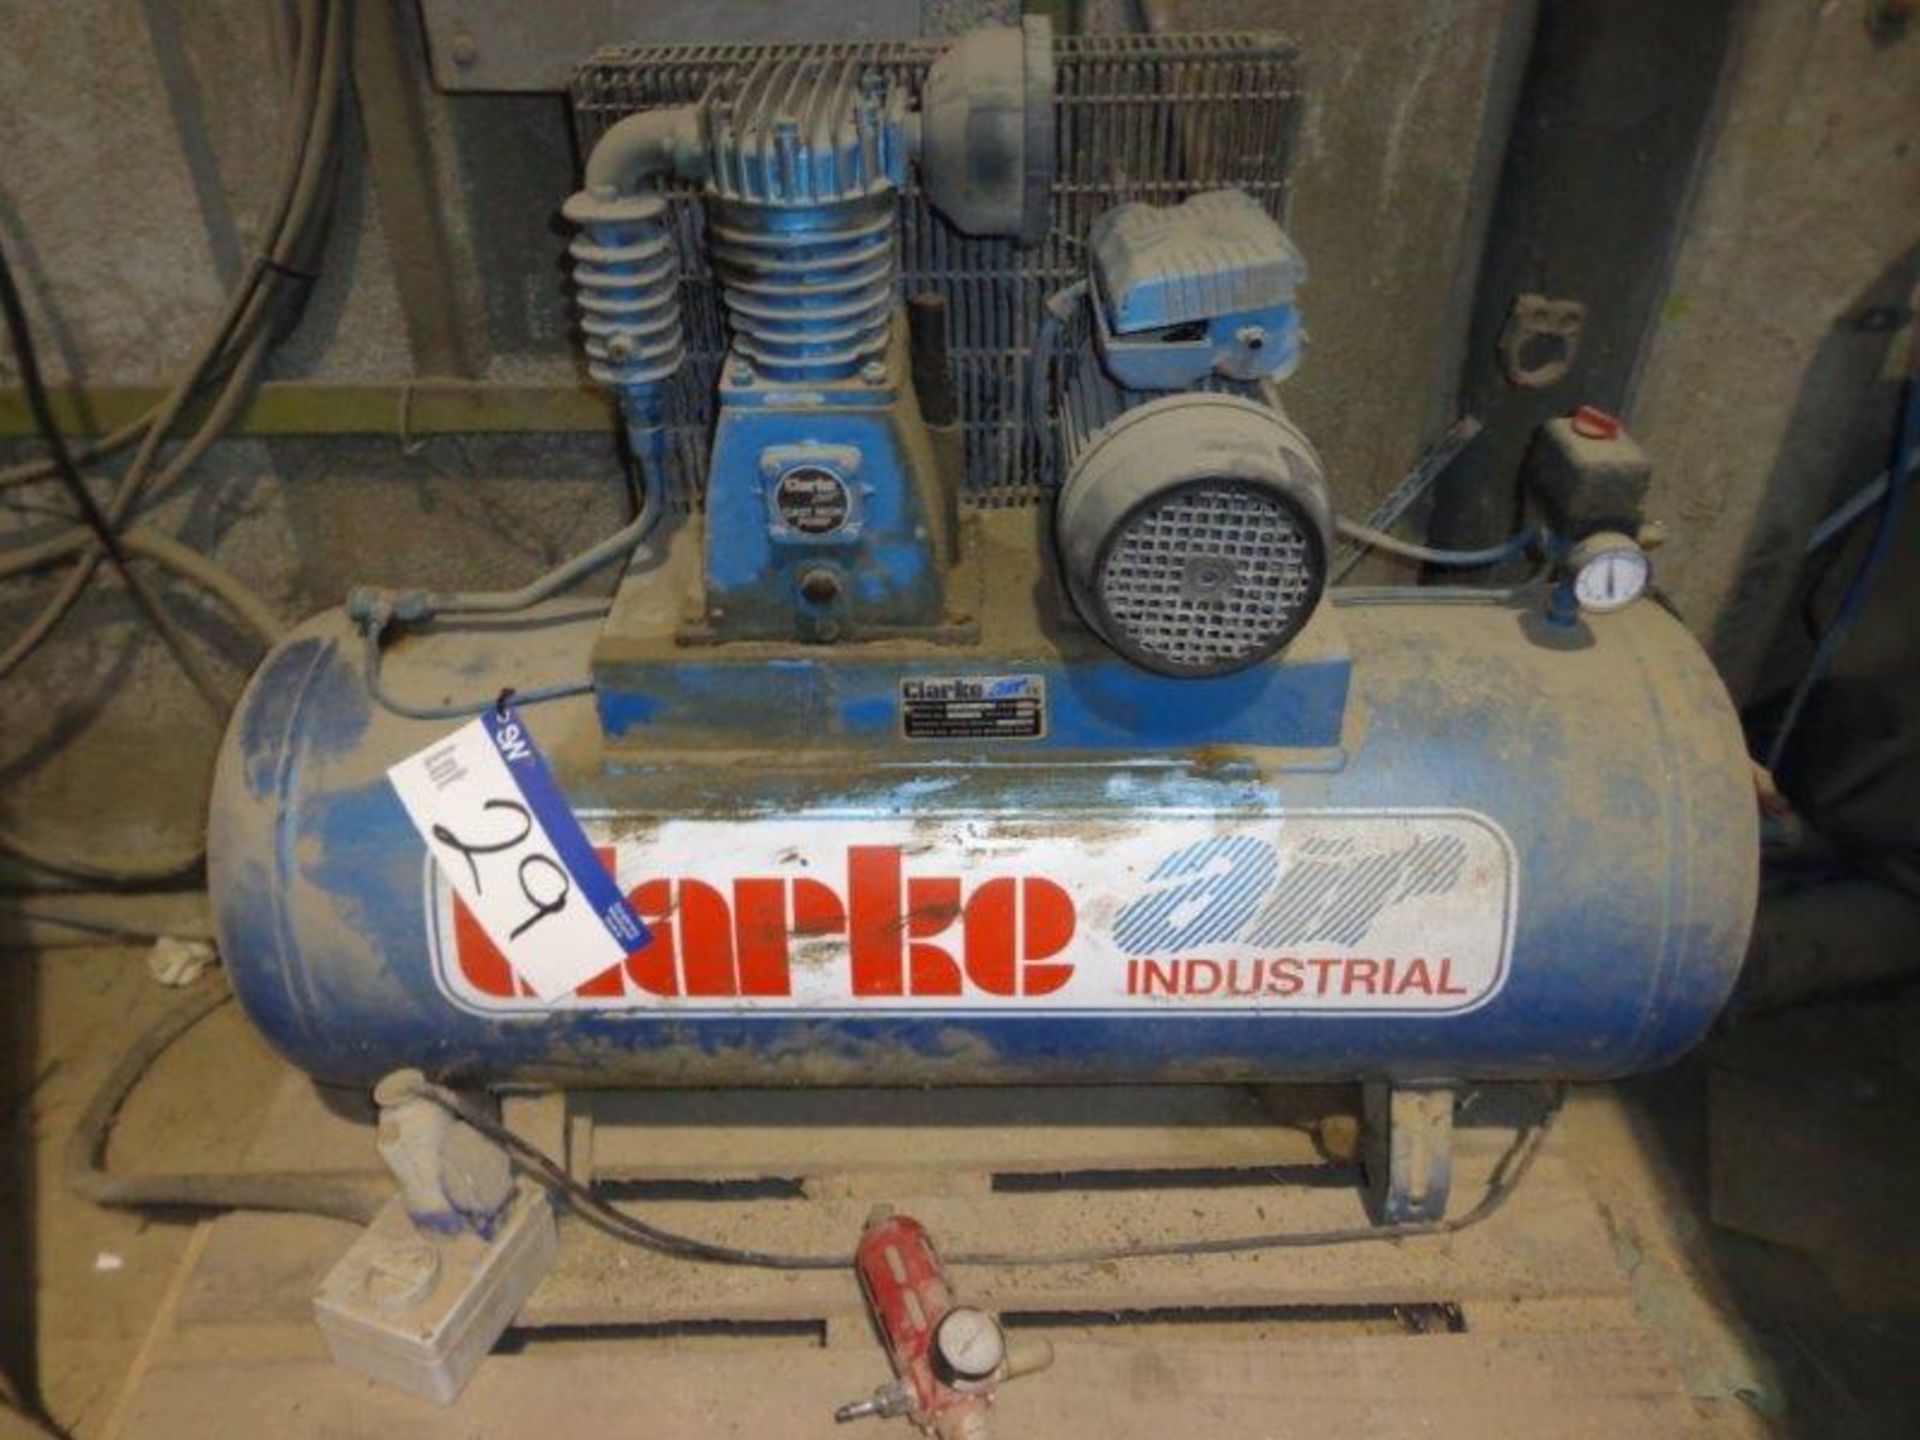 CLARKE AIR SF16C150 Receiver Mounted Air Compressor s/n 58911, year of manufacture 2006